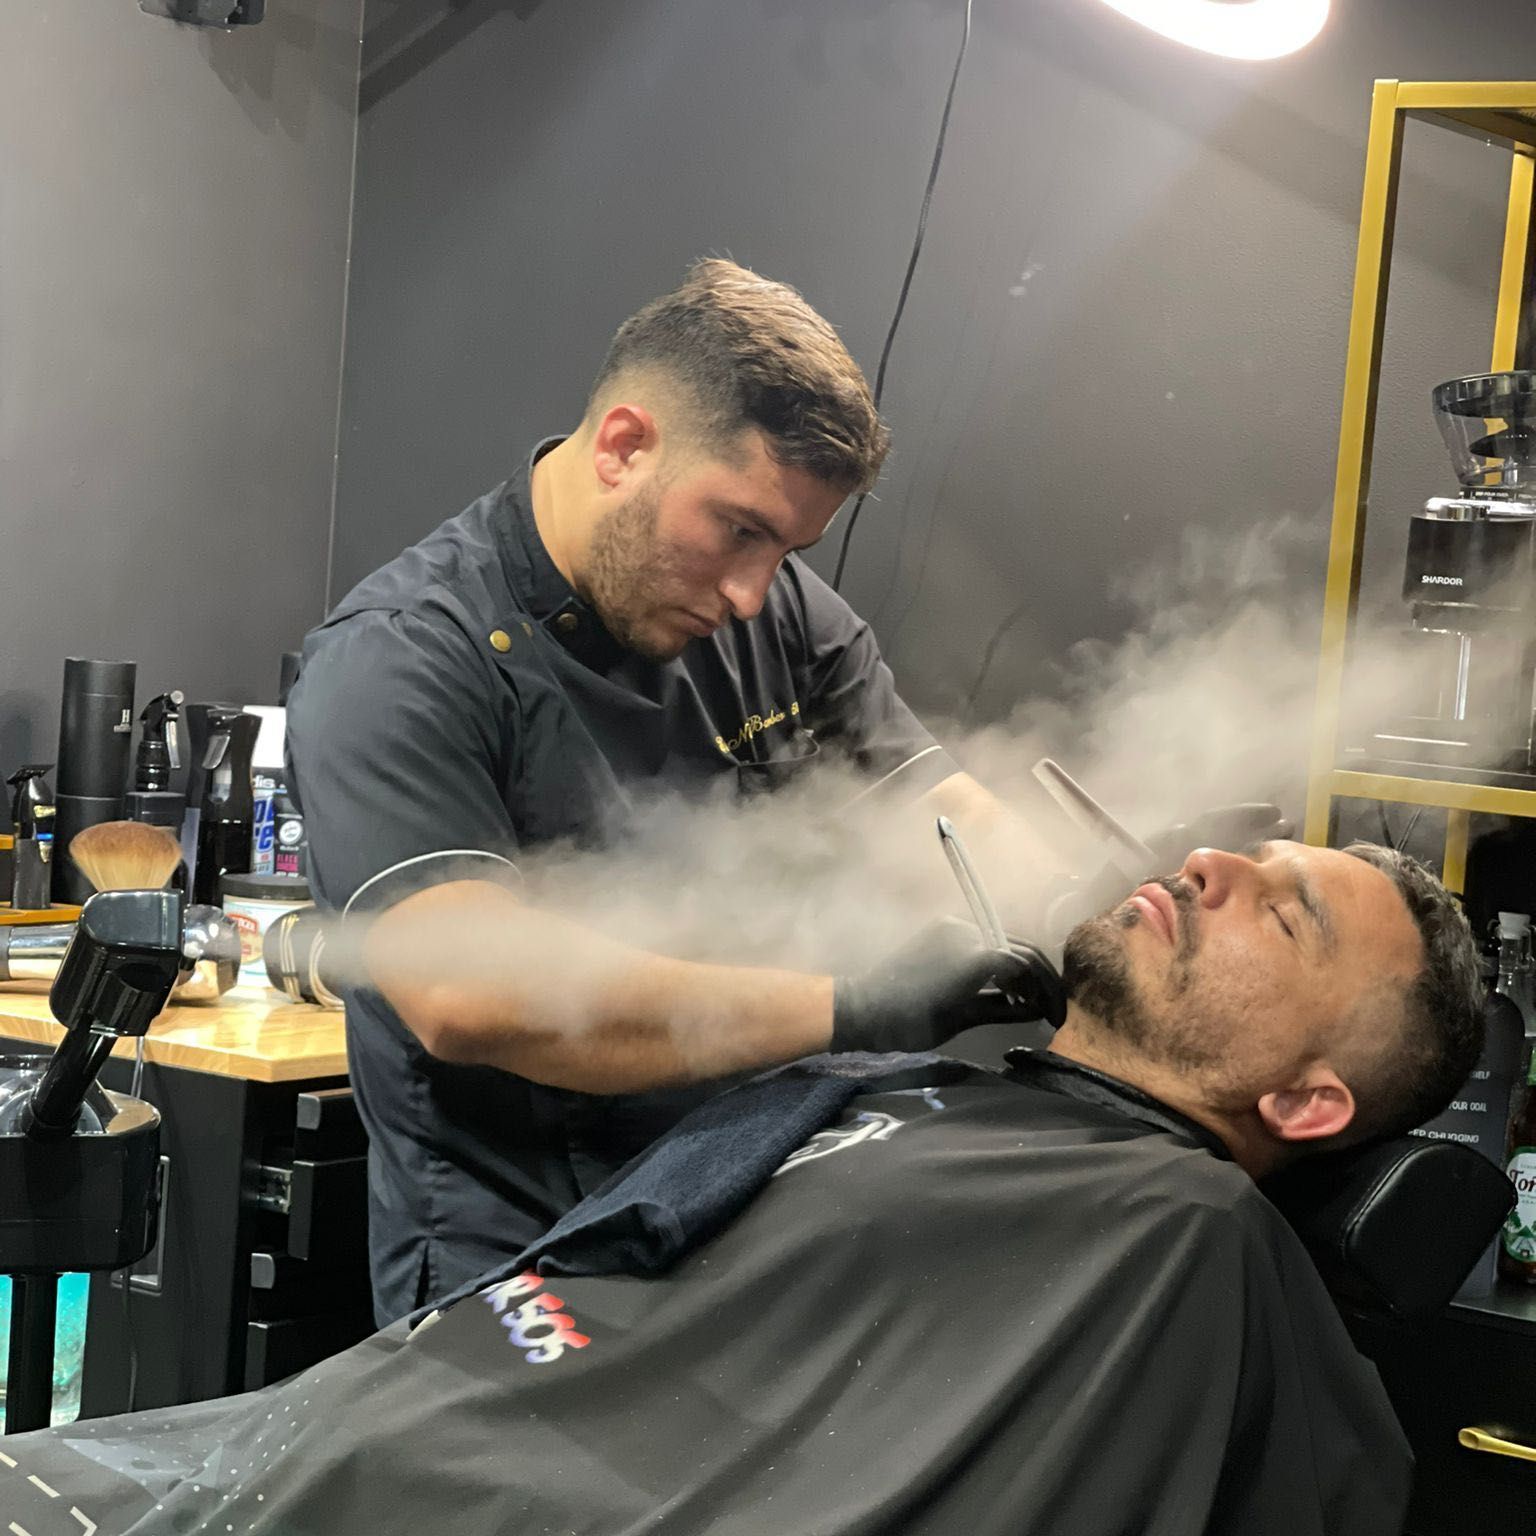 The N1C4 Haircut + Hot Towel Shave Experience portfolio